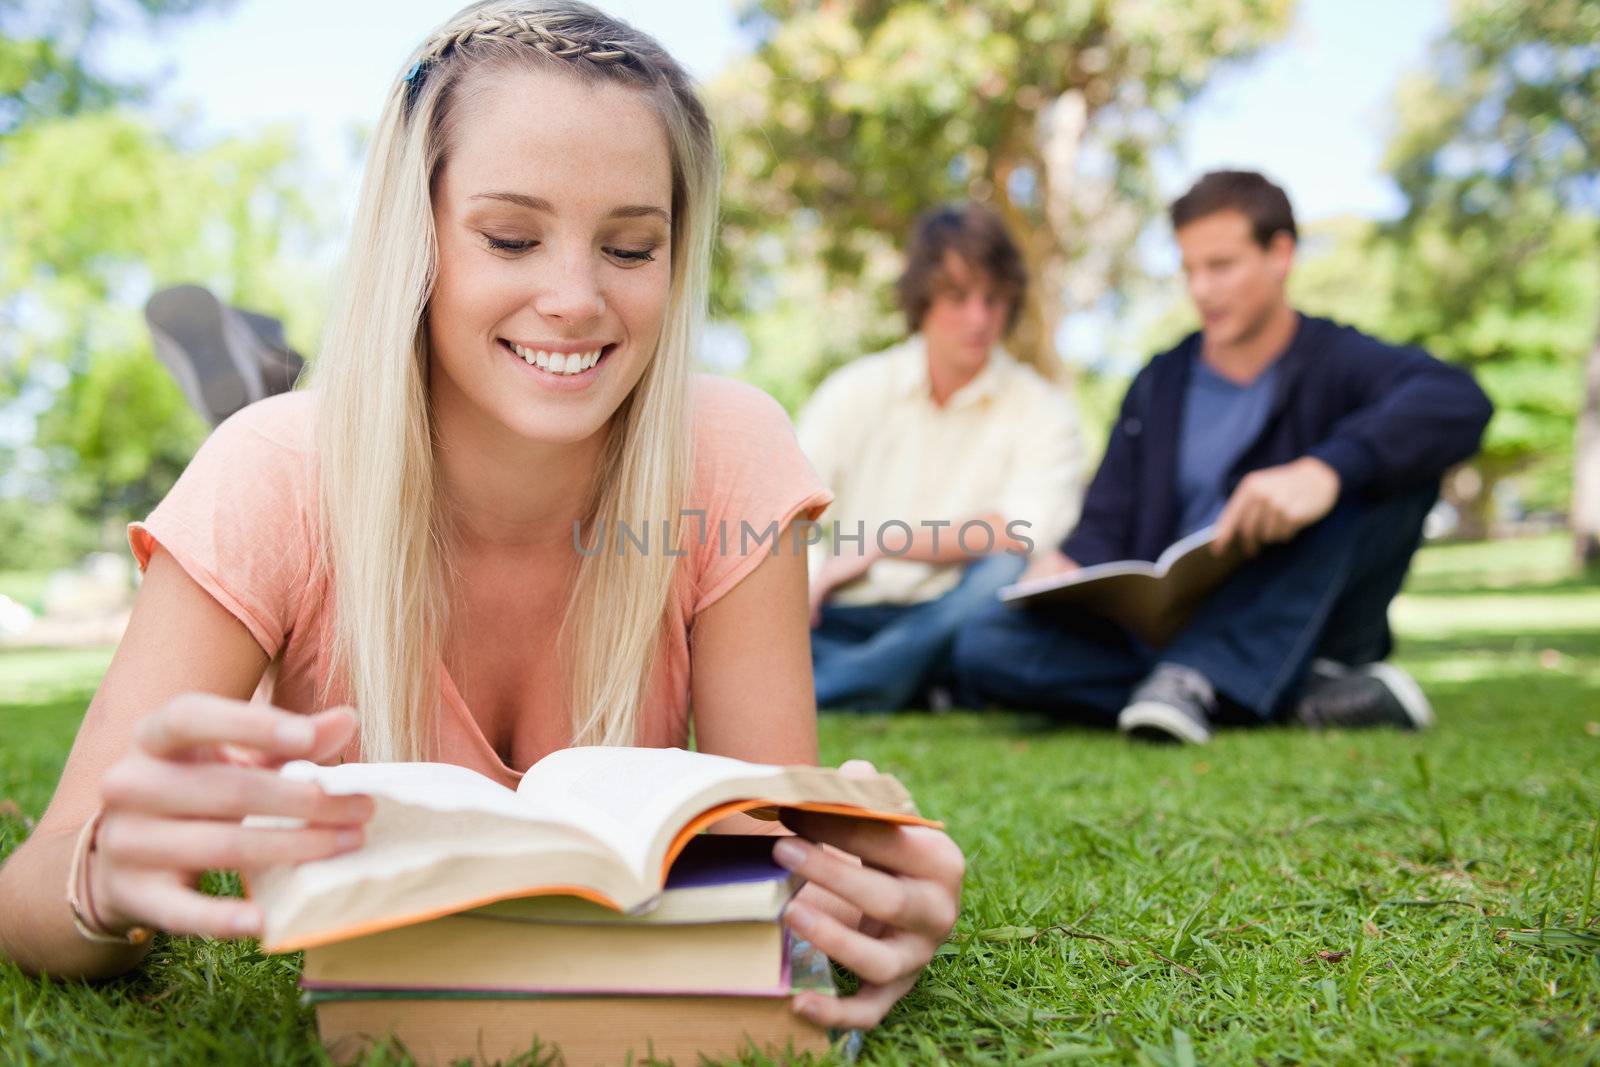 Girl lying while reading books in a park with friends in background